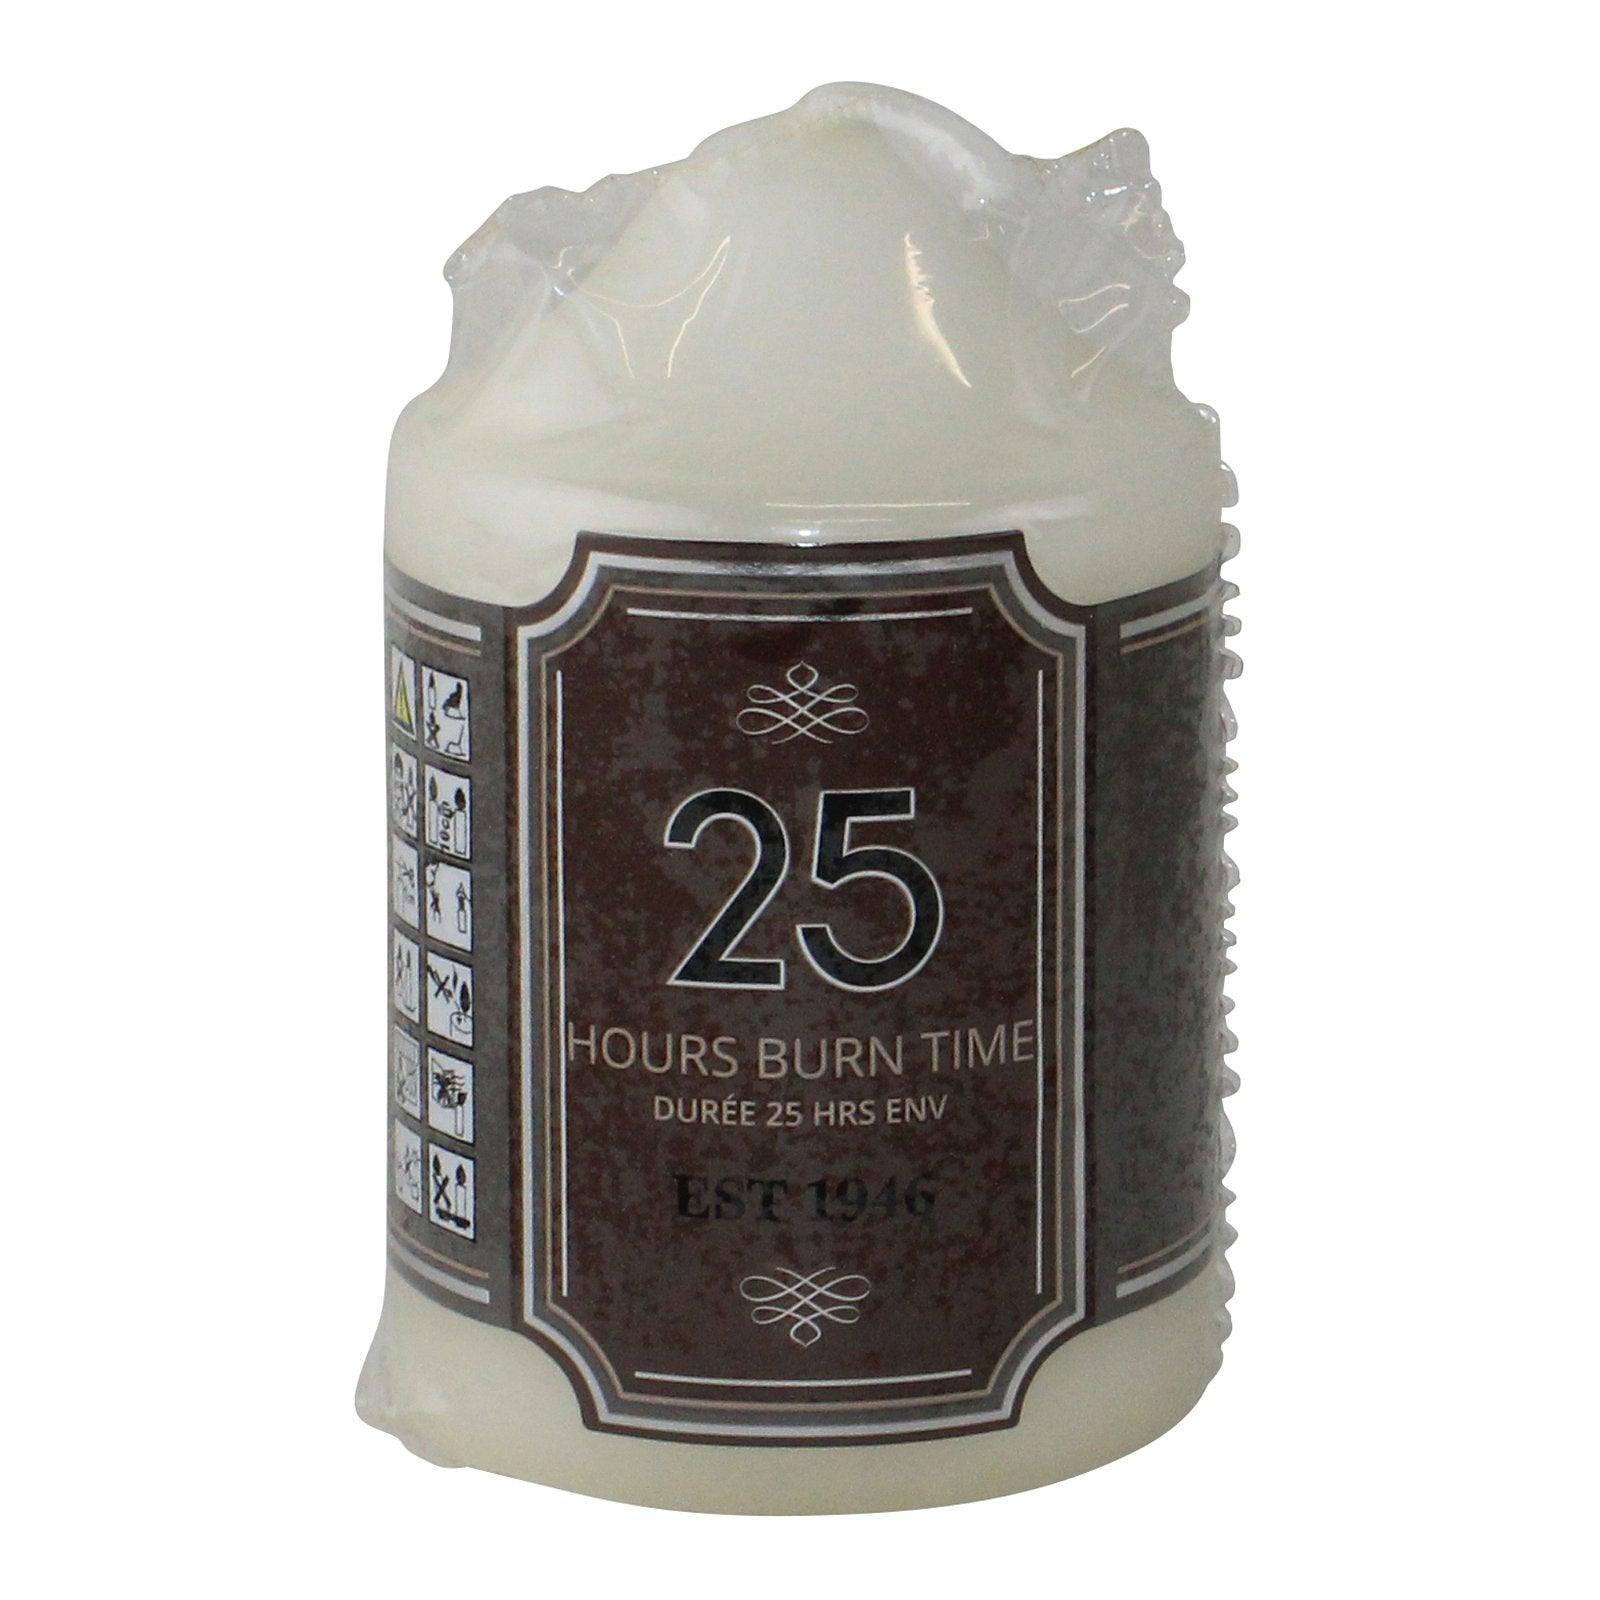 Overdipped Church Pillar Candle, 25 hour Burn Time - £9.99 - Candles 